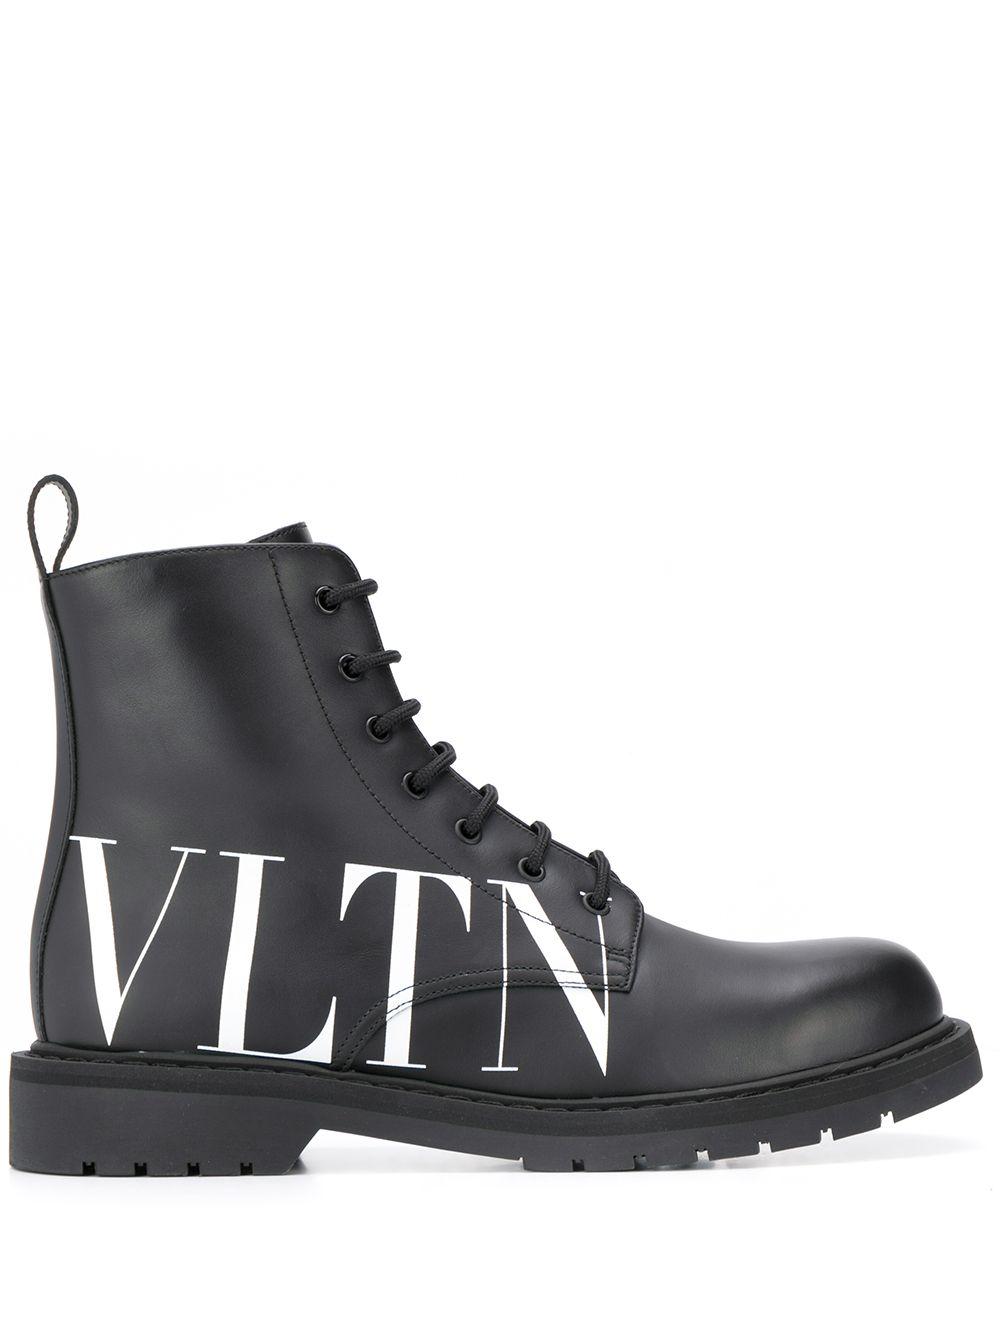 Valentino Boot With Logo in Black for Men - Lyst